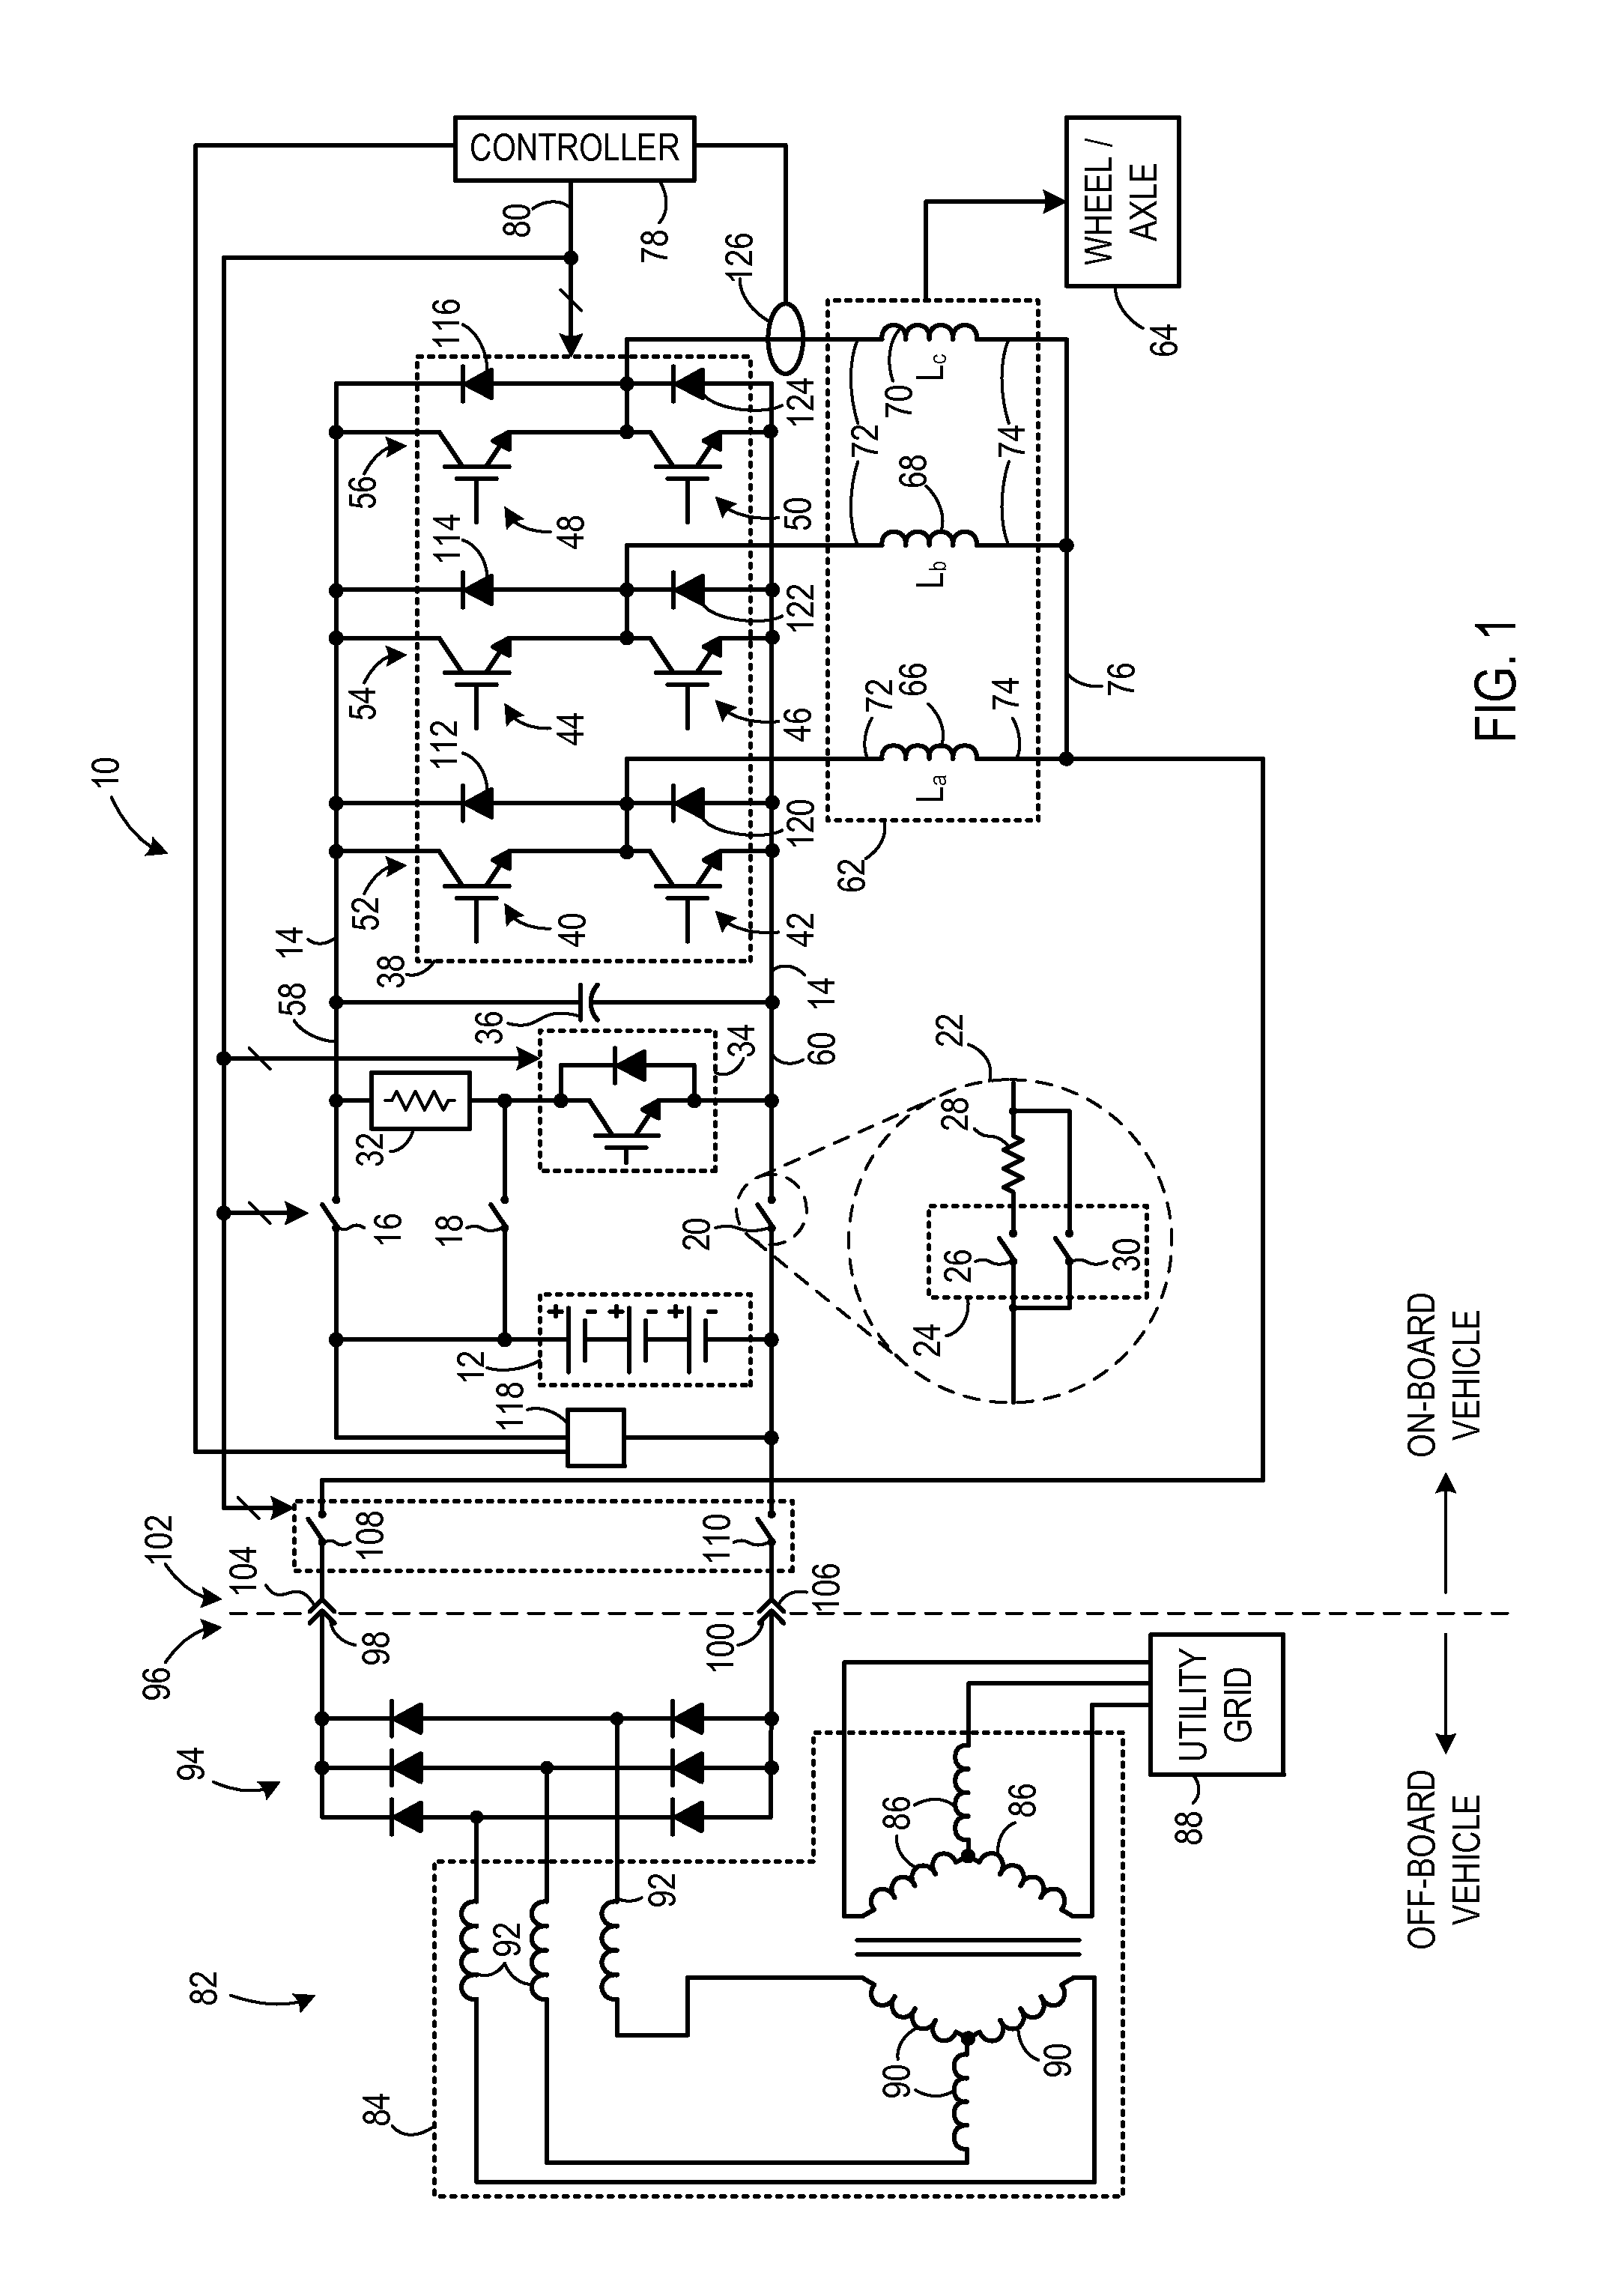 Apparatus for transferring energy using onboard power electronics and method of manufacturing same